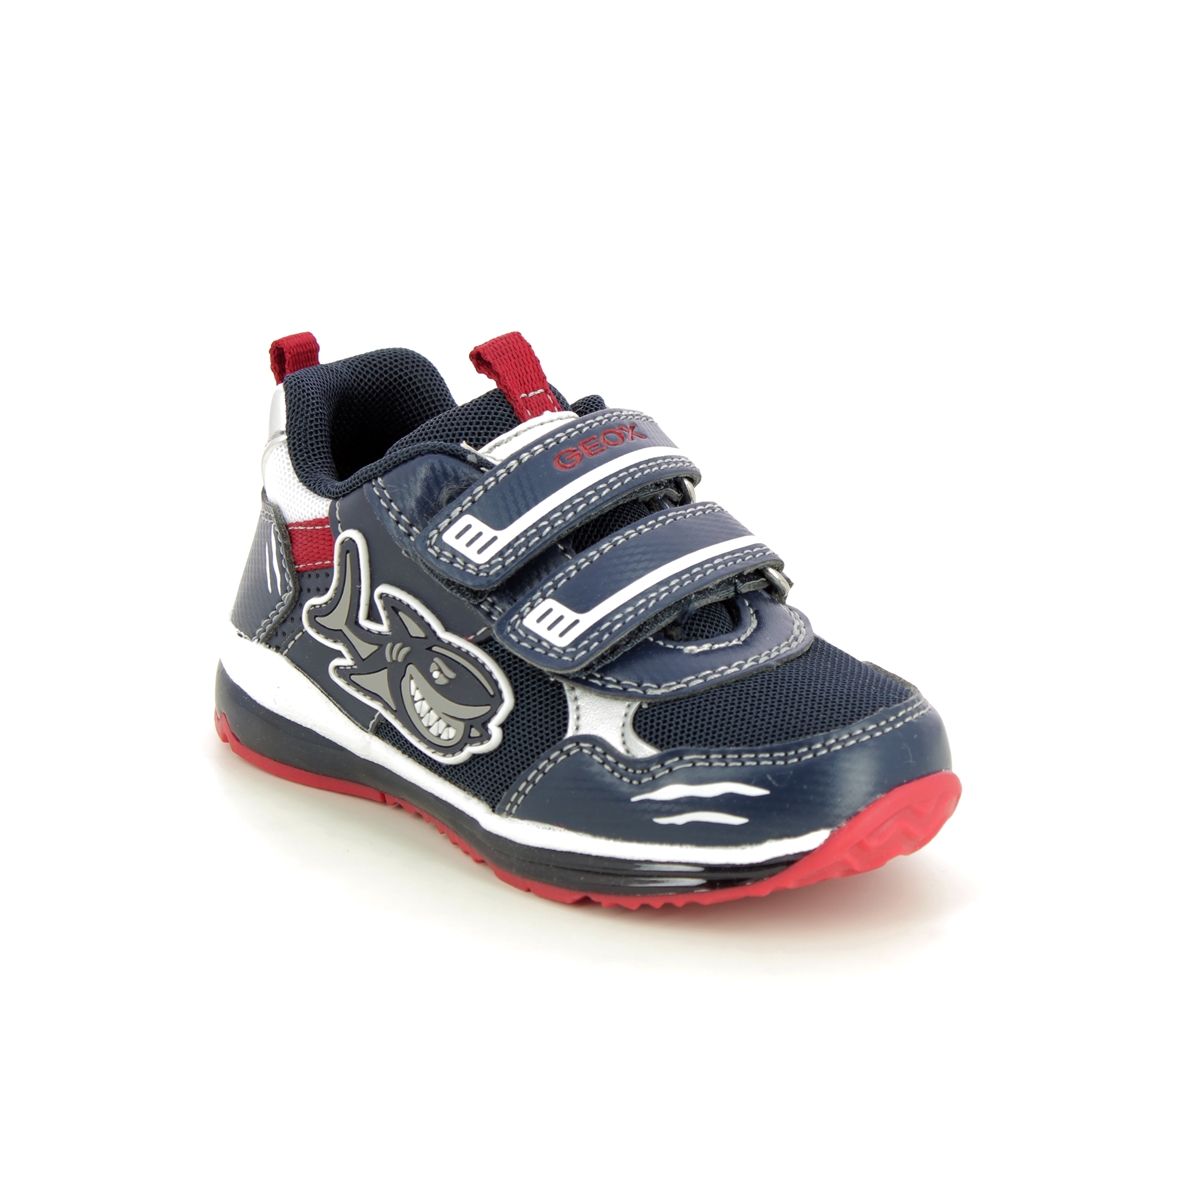 Geox - Todo Shark 2V (Navy Red) B2584A-C0735 In Size 22 In Plain Navy Red For kids